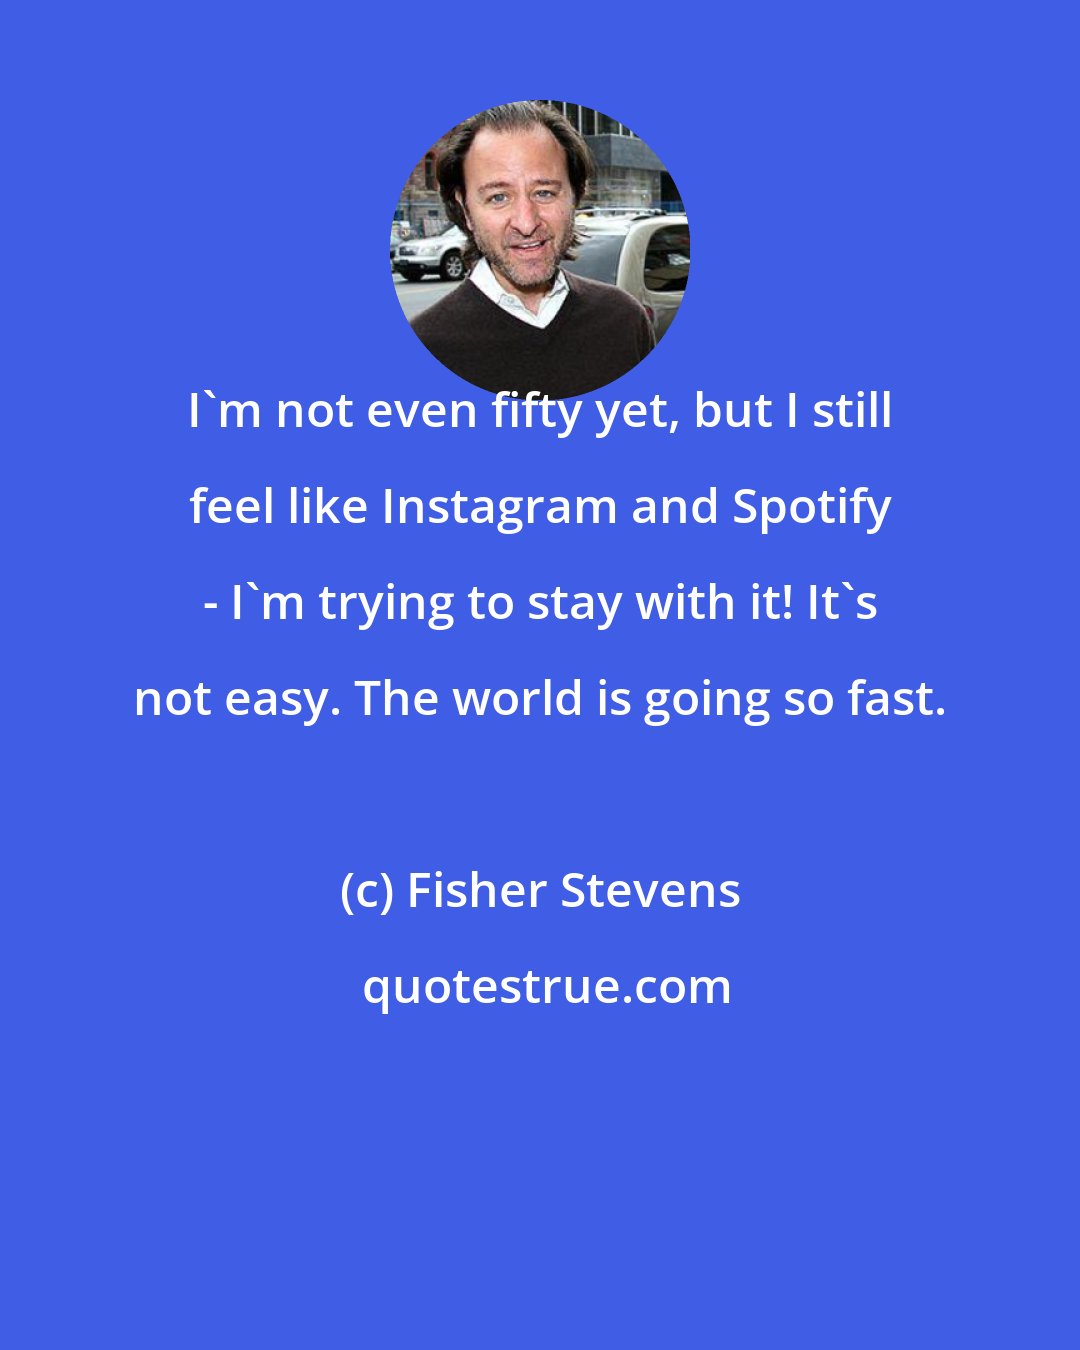 Fisher Stevens: I'm not even fifty yet, but I still feel like Instagram and Spotify - I'm trying to stay with it! It's not easy. The world is going so fast.